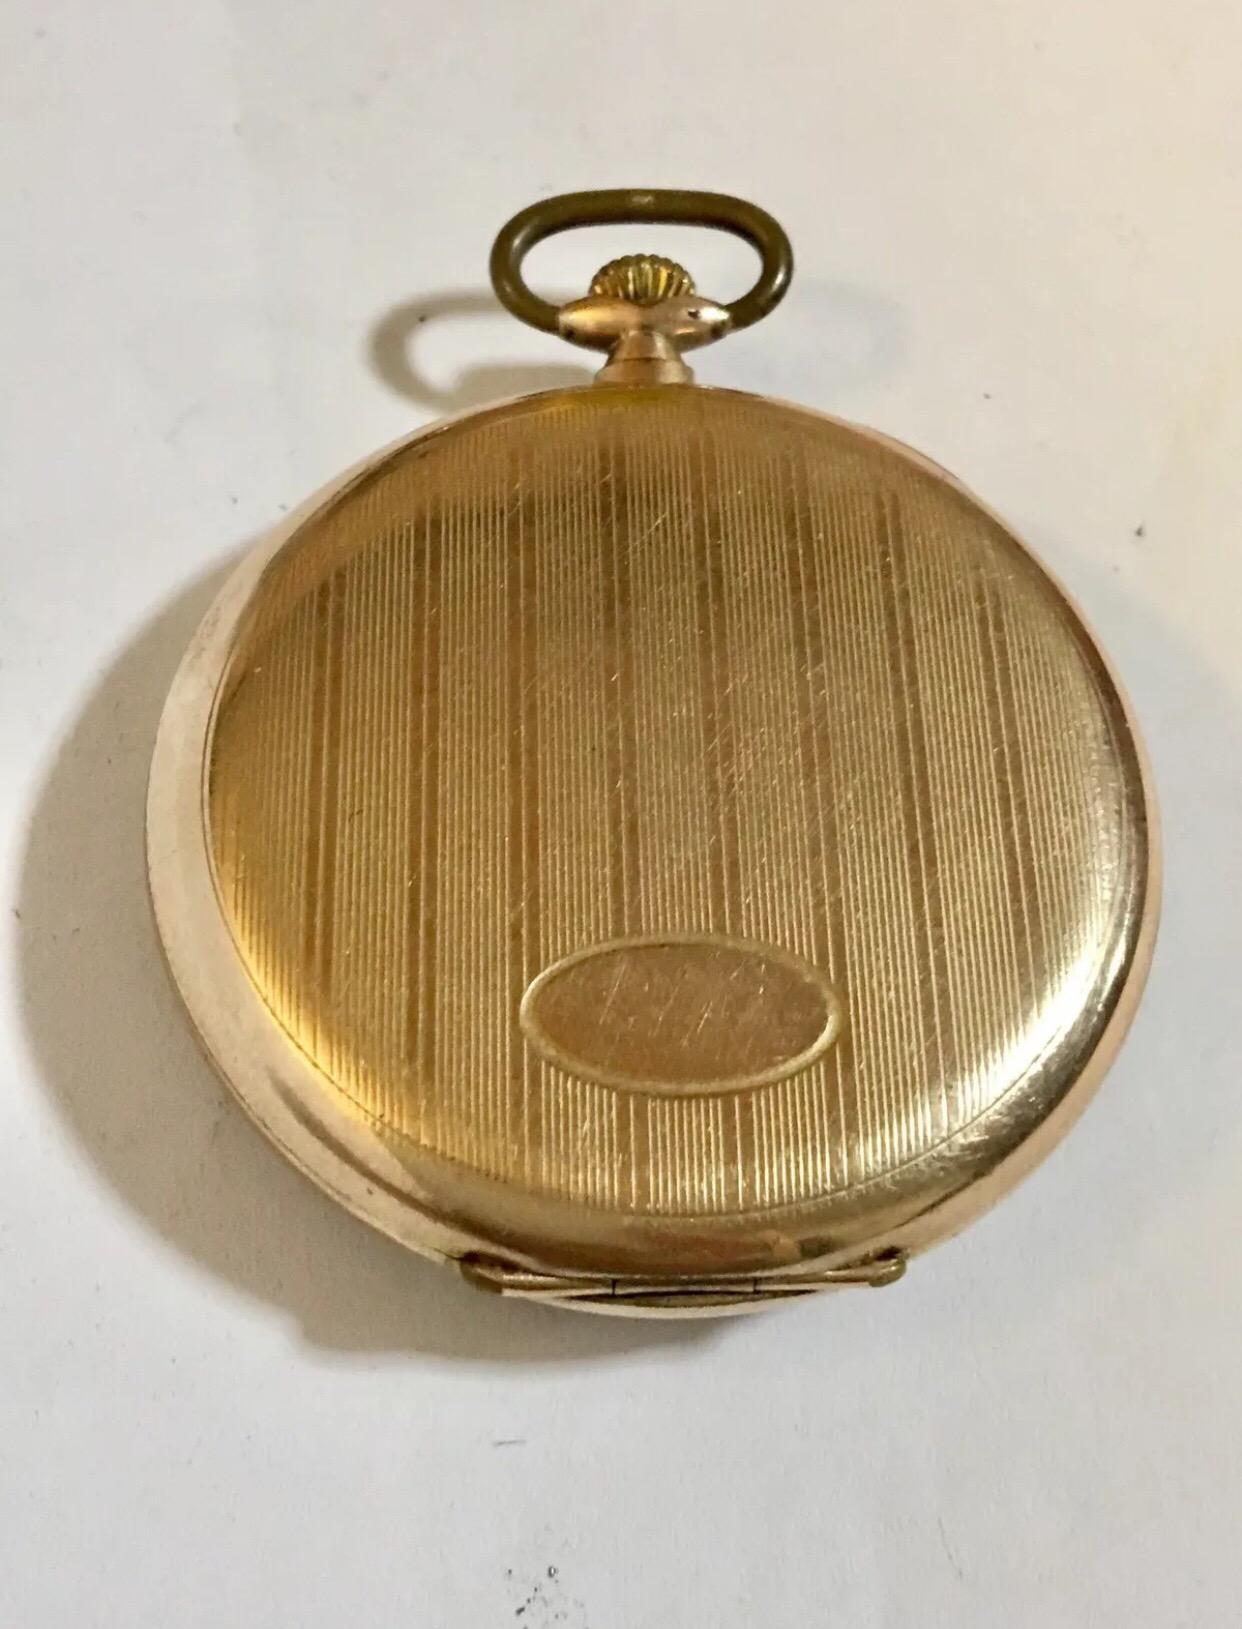 Cyma Pocket Watch . This watch in good working condition. Beautiful gold plated case. The dial looks a bit tired considering an old pocket watch. 